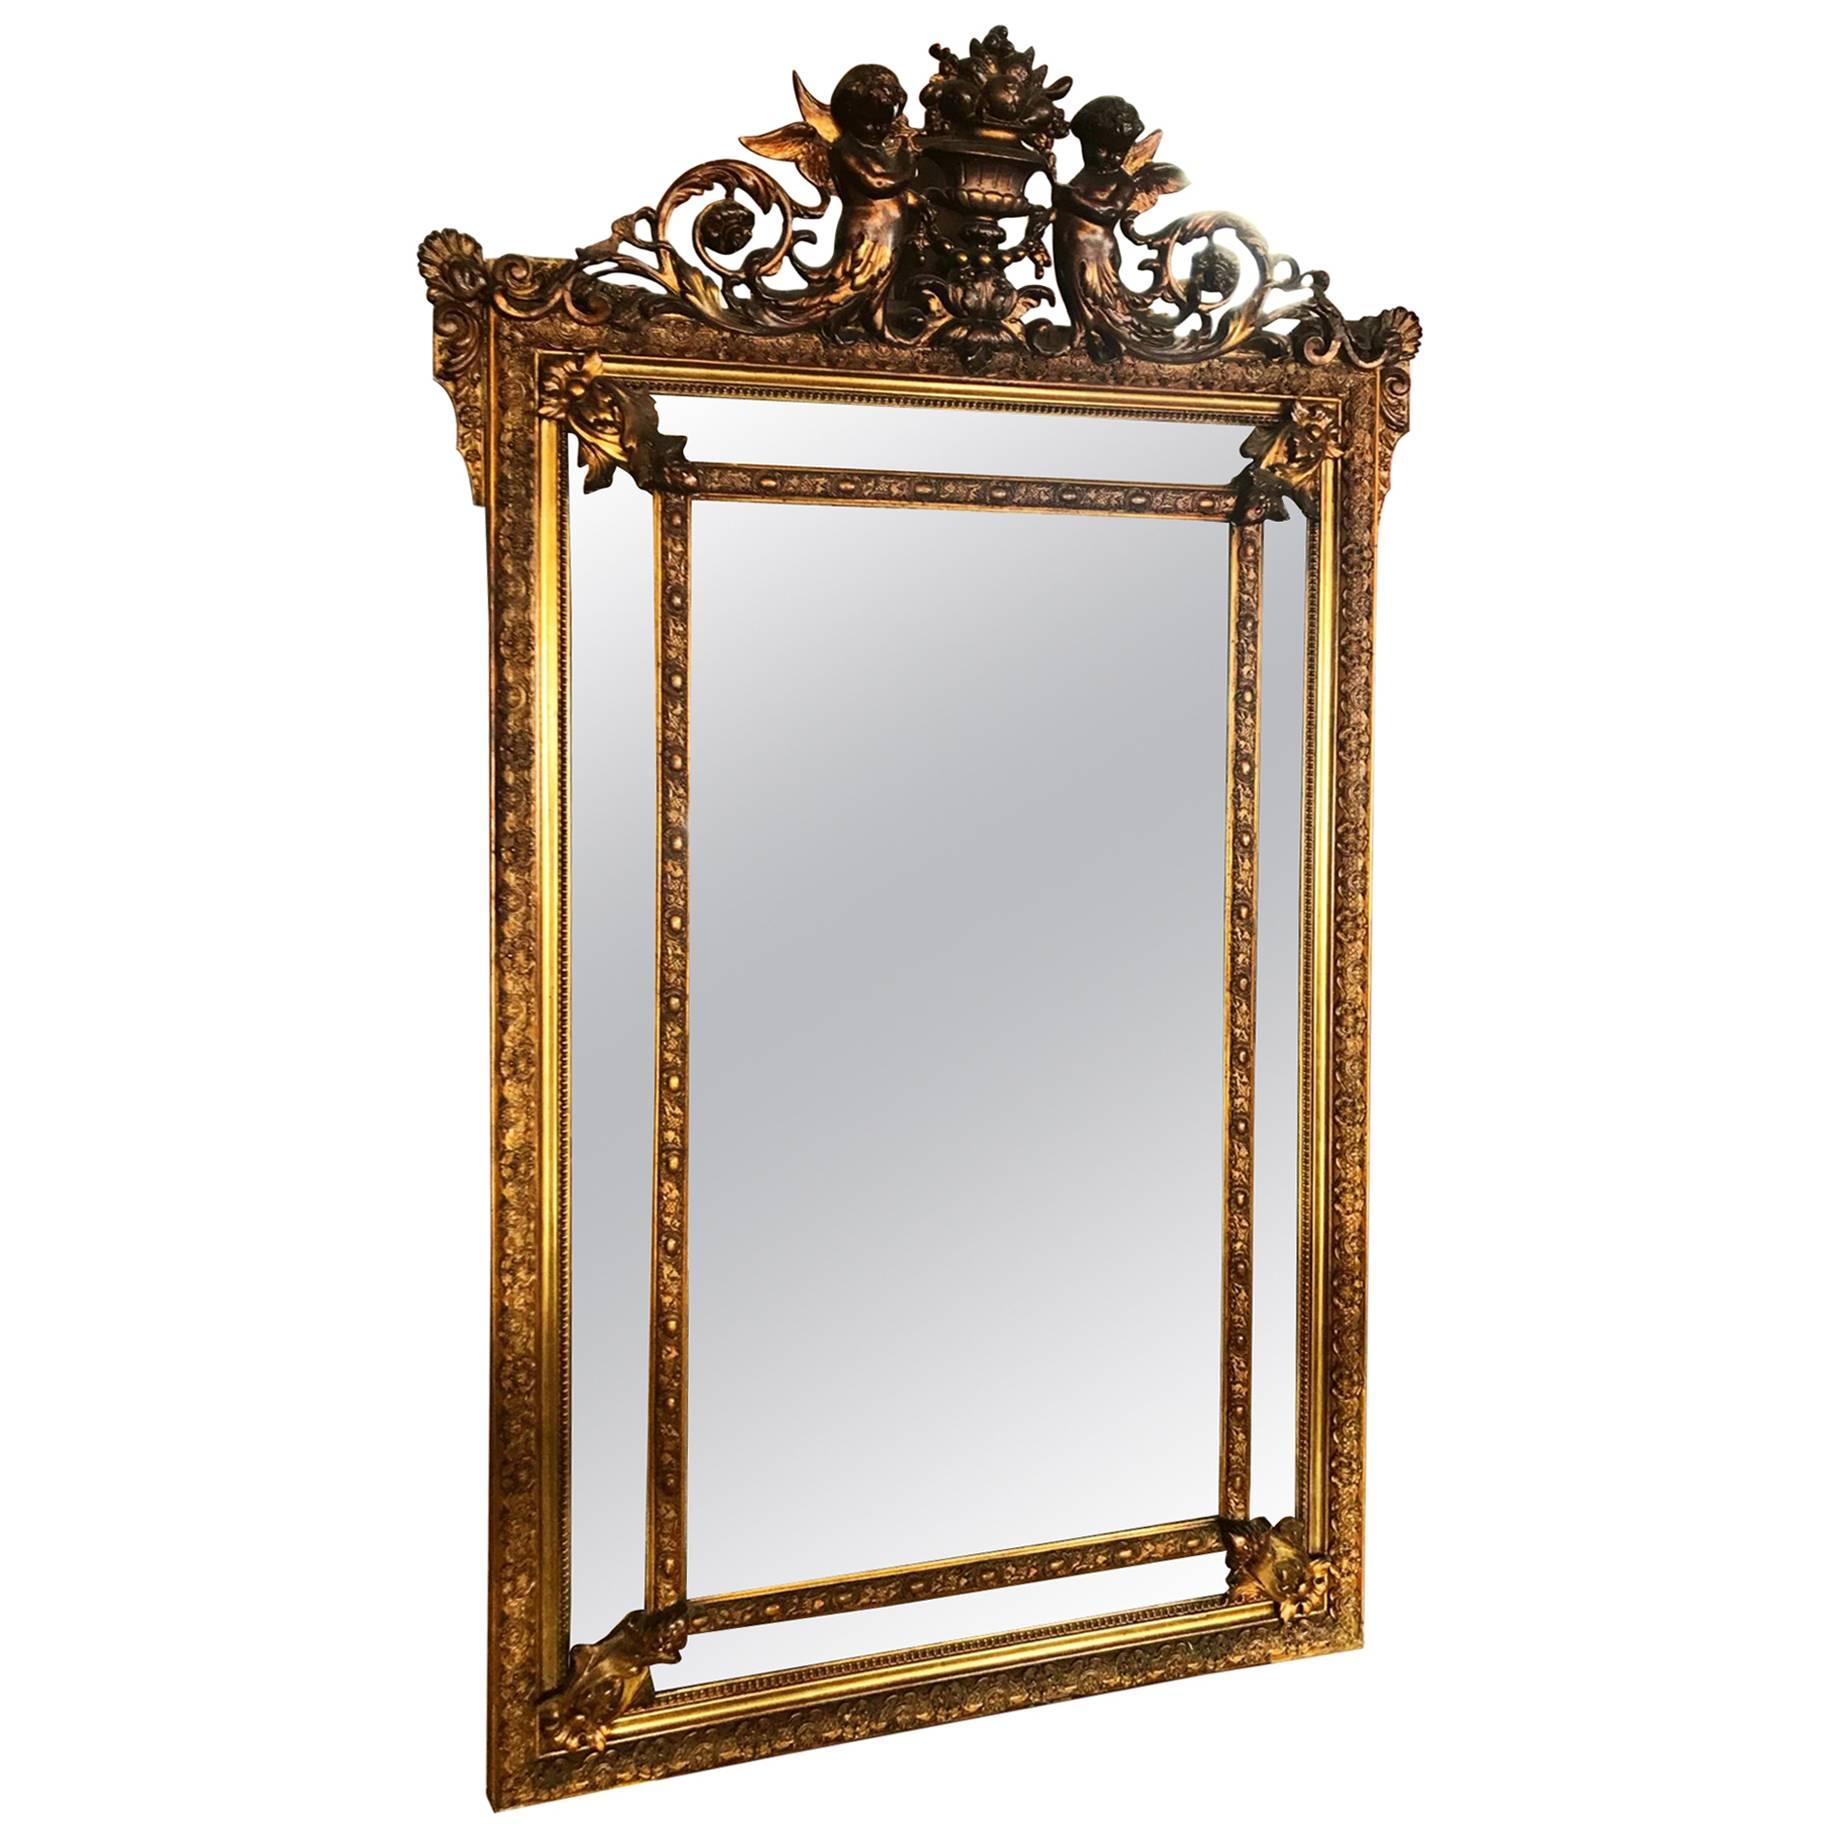 Late-19th Century French Louis XV Carved Gold Leaf Wall Hanging Parclose Mirror For Sale